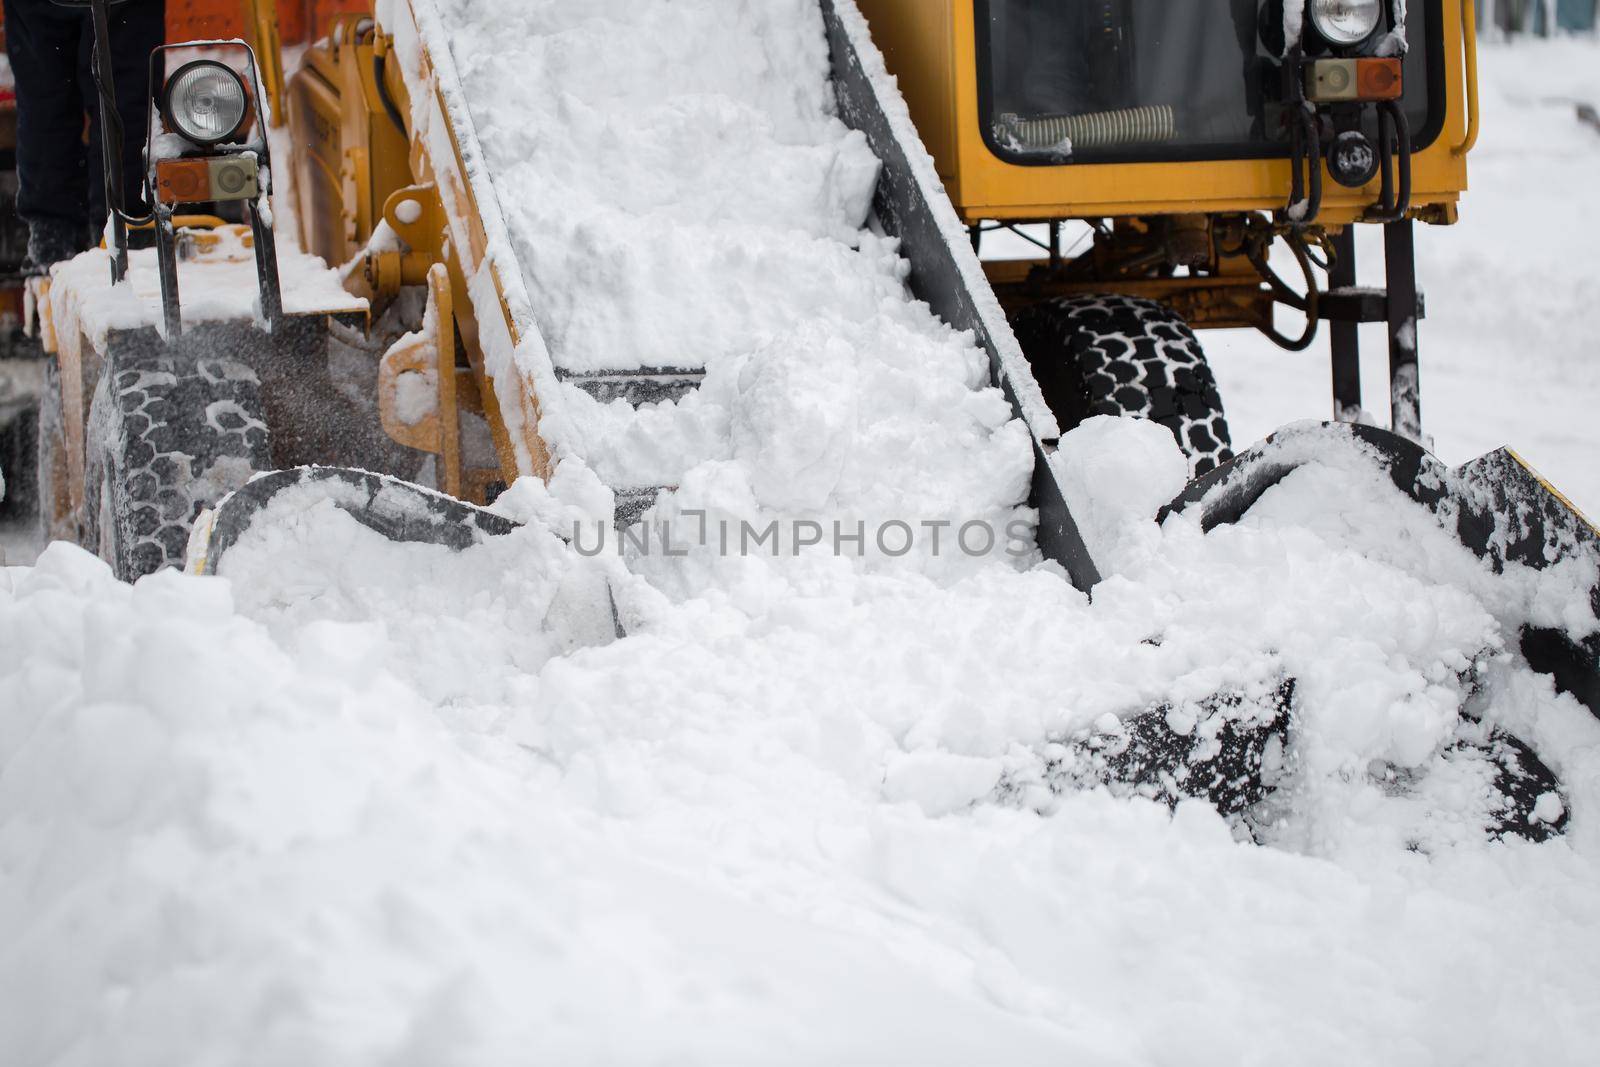 Paw snow loader with a conveyor belt in the winter on a city street